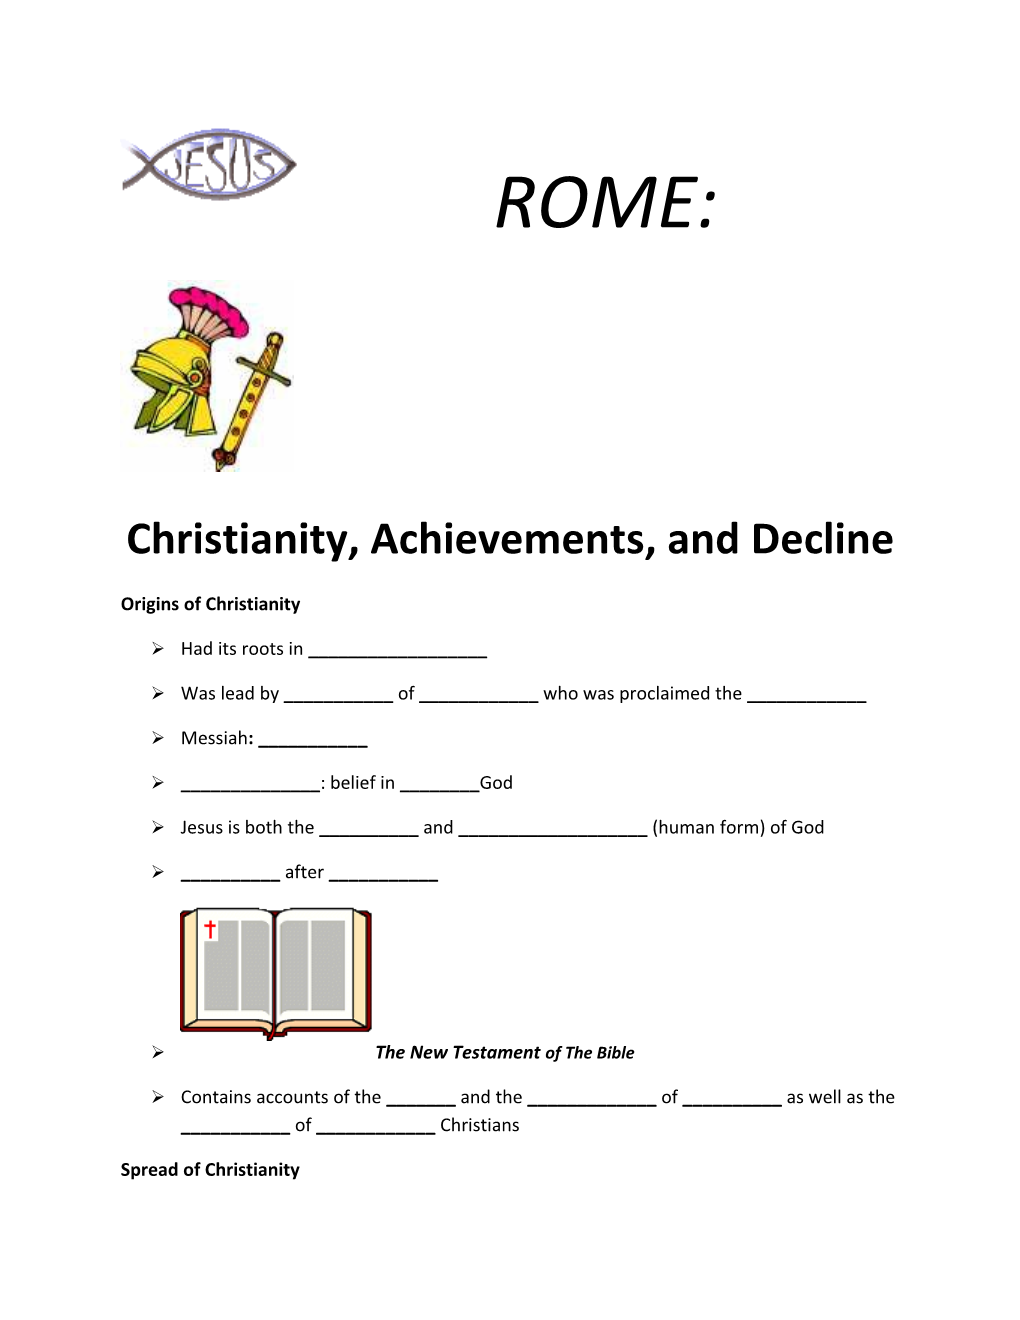 Christianity, Achievements, and Decline